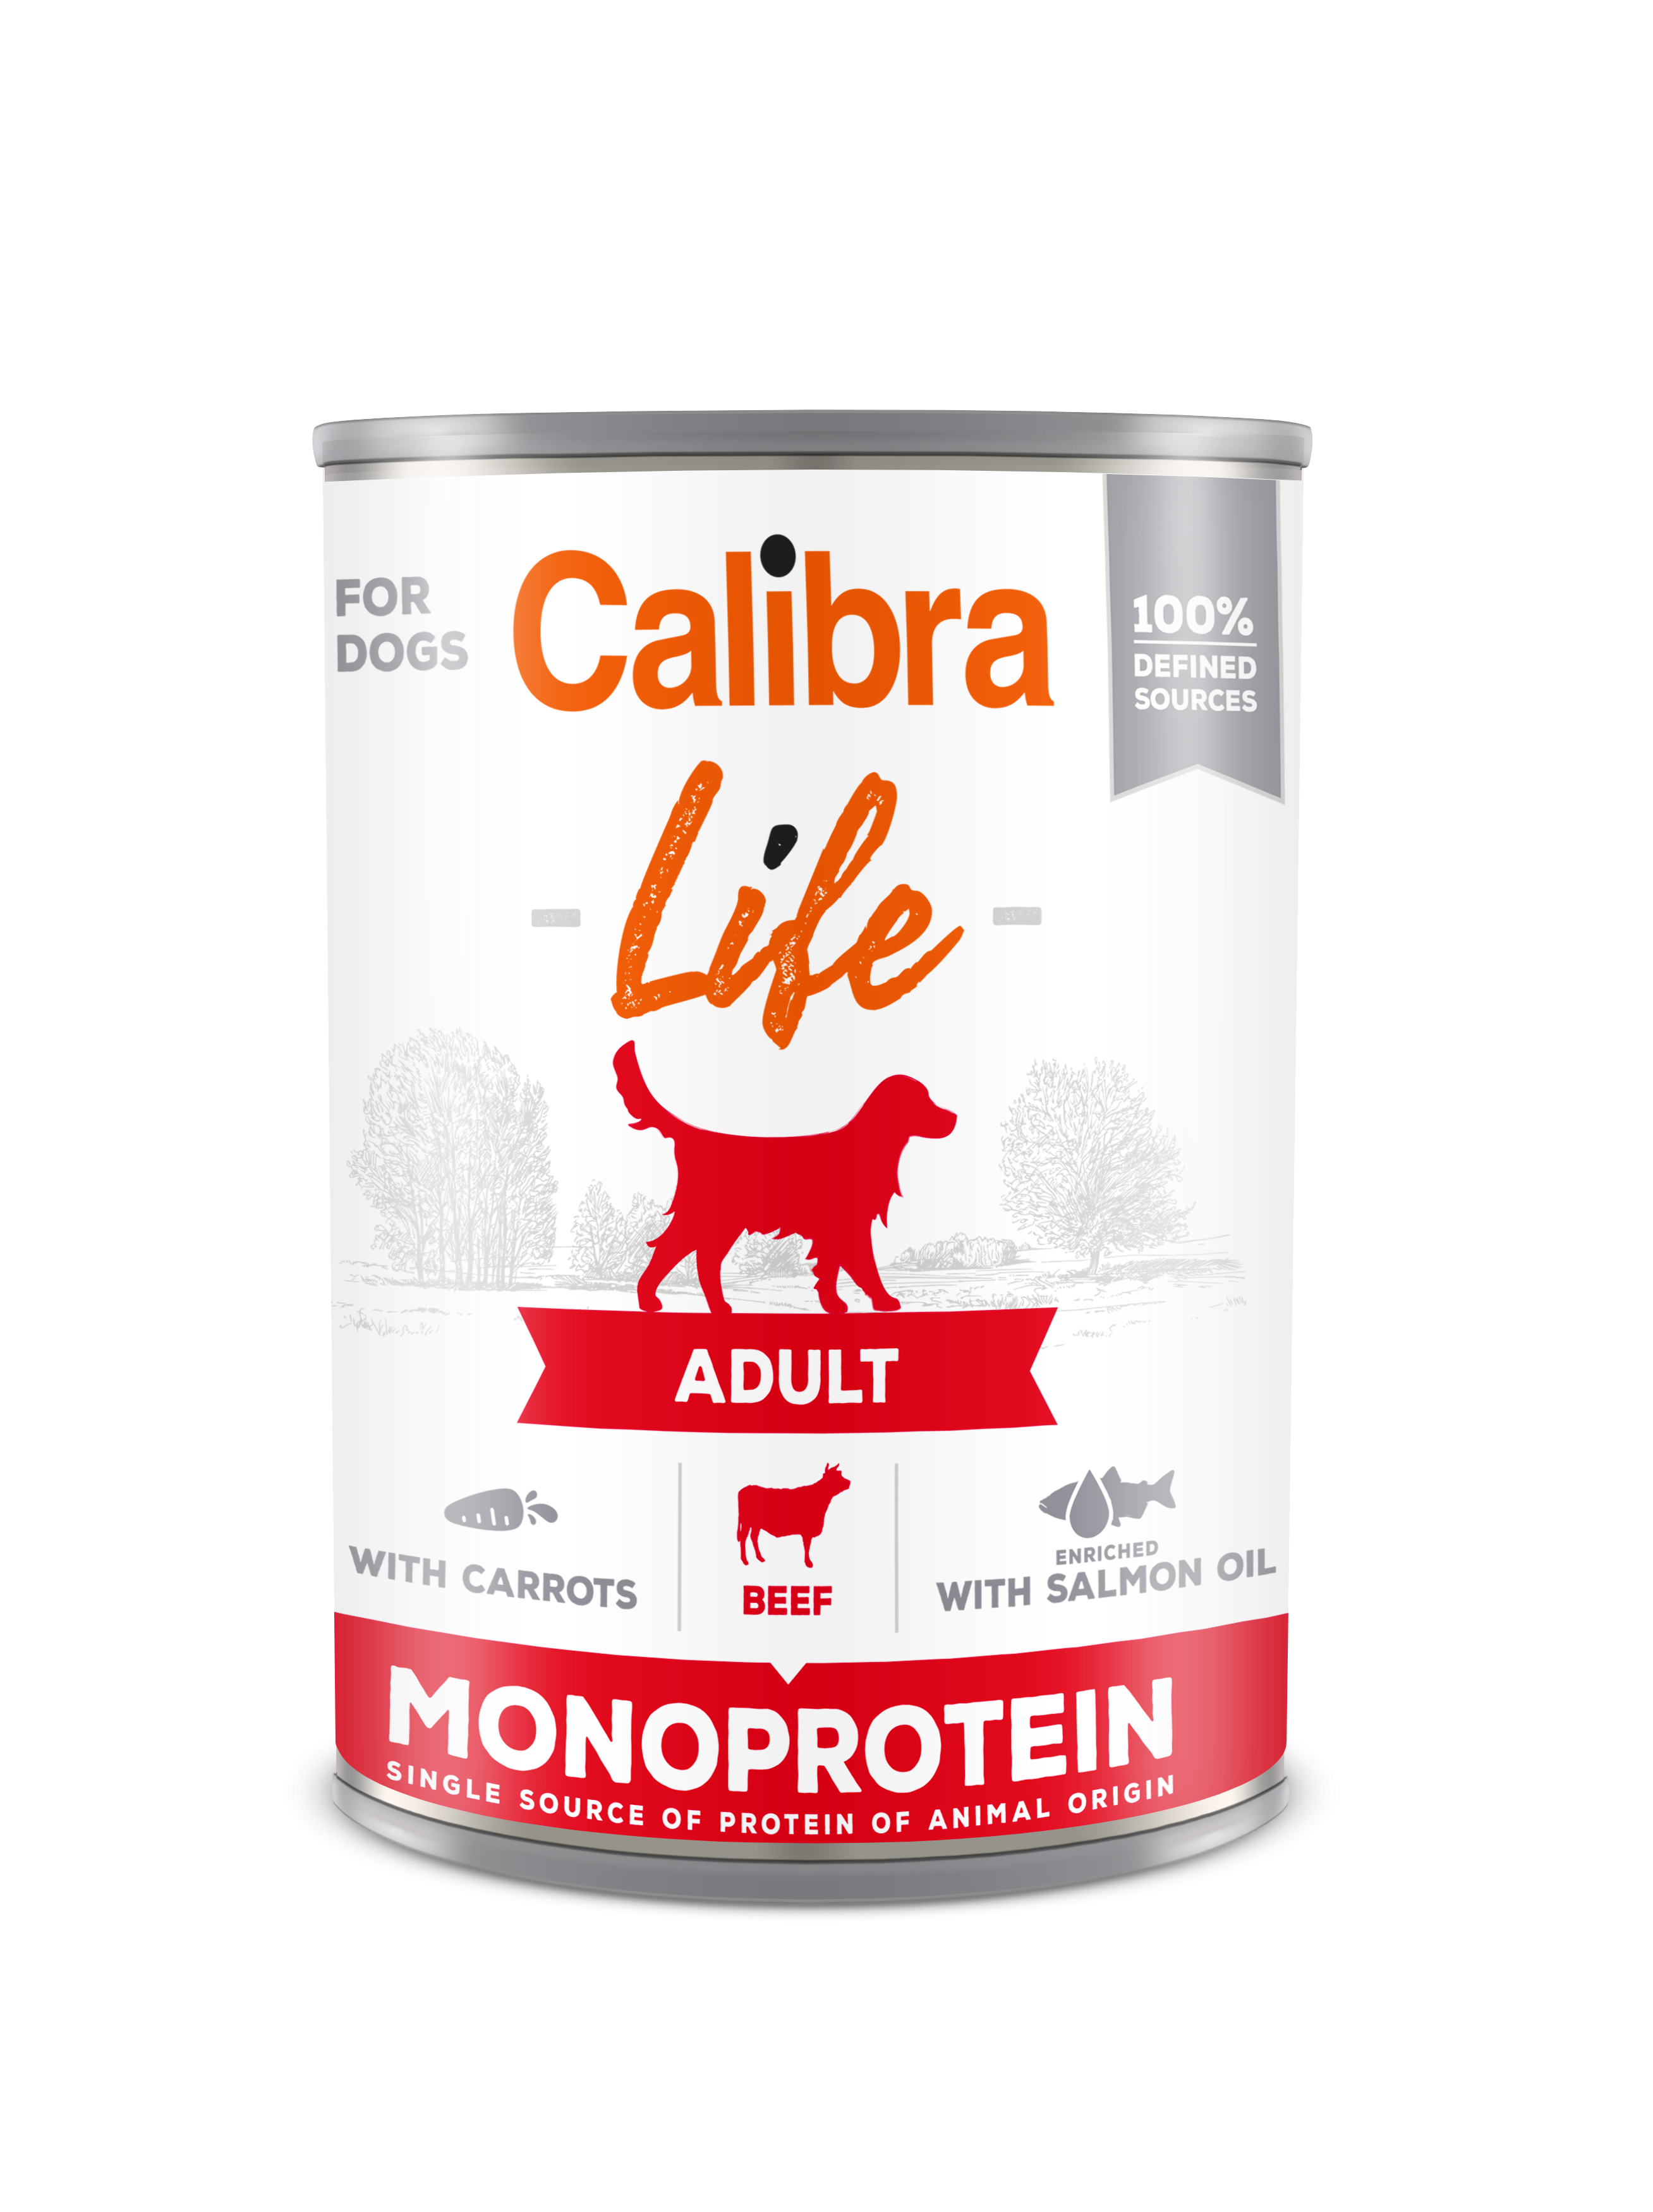 Calibra Dog Life Adult Beef with Carrots 400 g, conserva